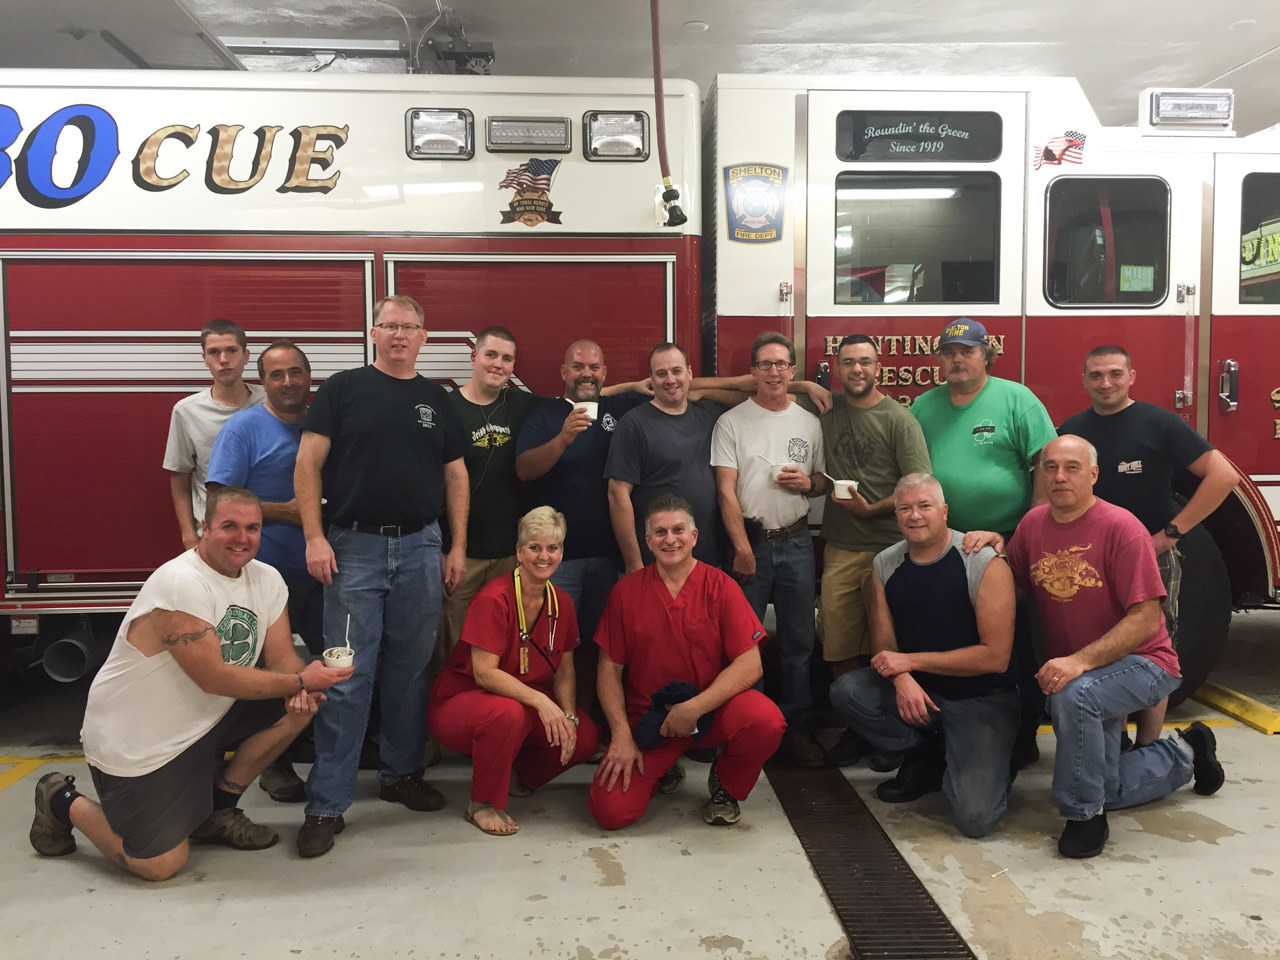 Fire Department Event with Ice Cream Emergency